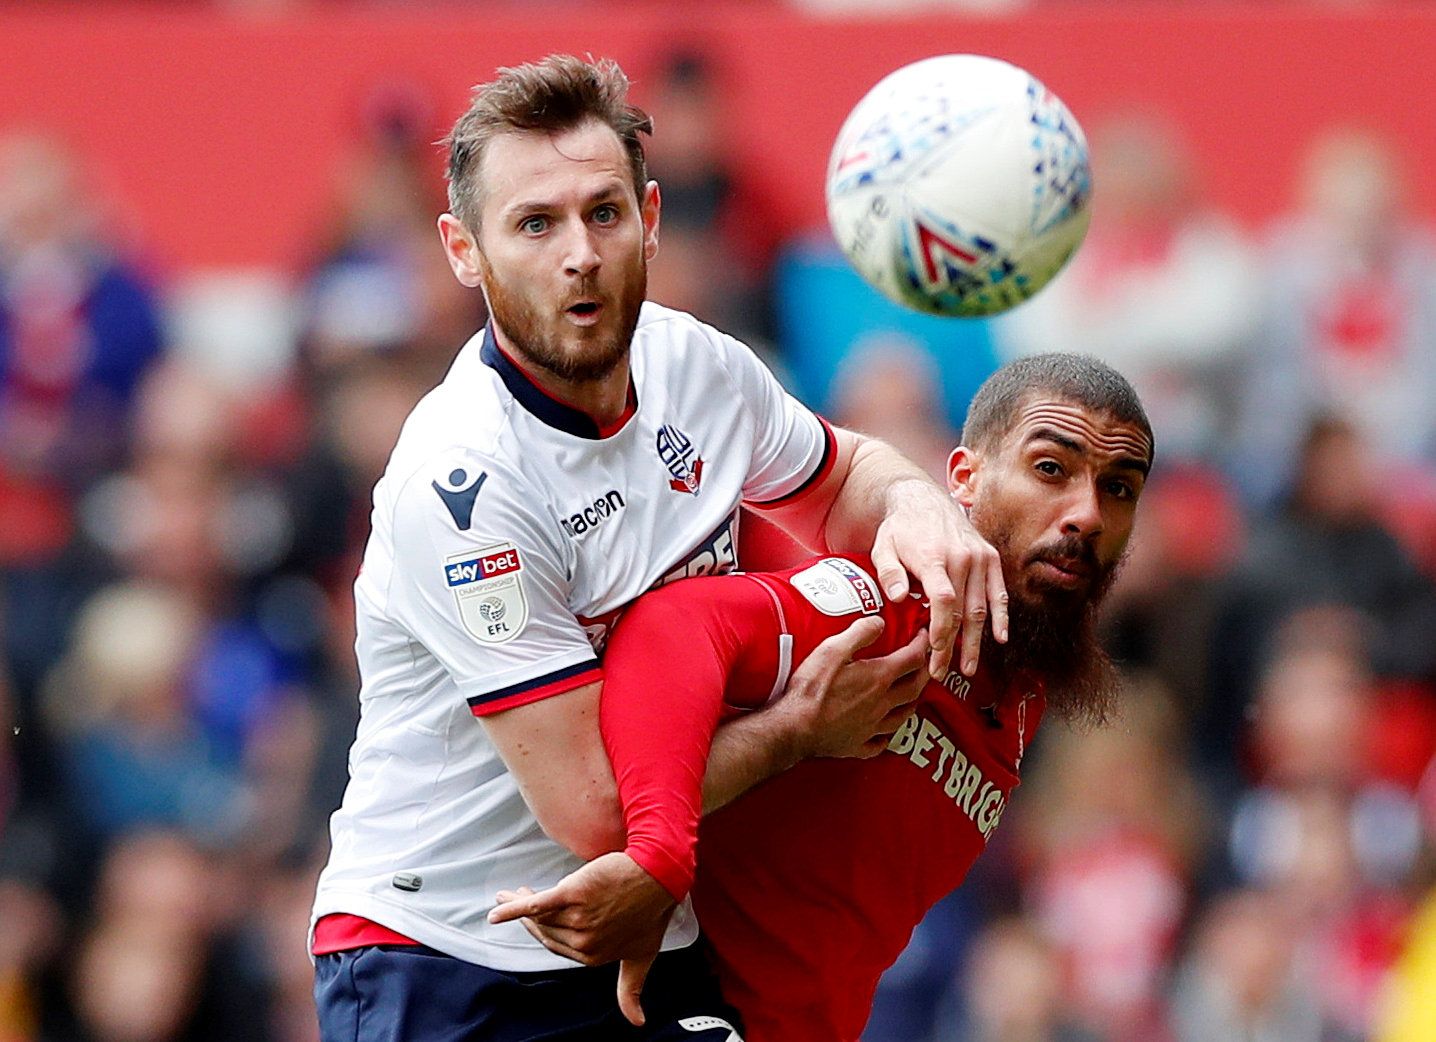 Soccer Football - Championship - Nottingham Forest v Bolton Wanderers - The City Ground, Nottingham, Britain - May 5, 2019   Nottingham Forest's Lewis Grabban in action with Bolton Wanderers' Jonathan Grounds   Action Images/Peter Cziborra    EDITORIAL USE ONLY. No use with unauthorized audio, video, data, fixture lists, club/league logos or 